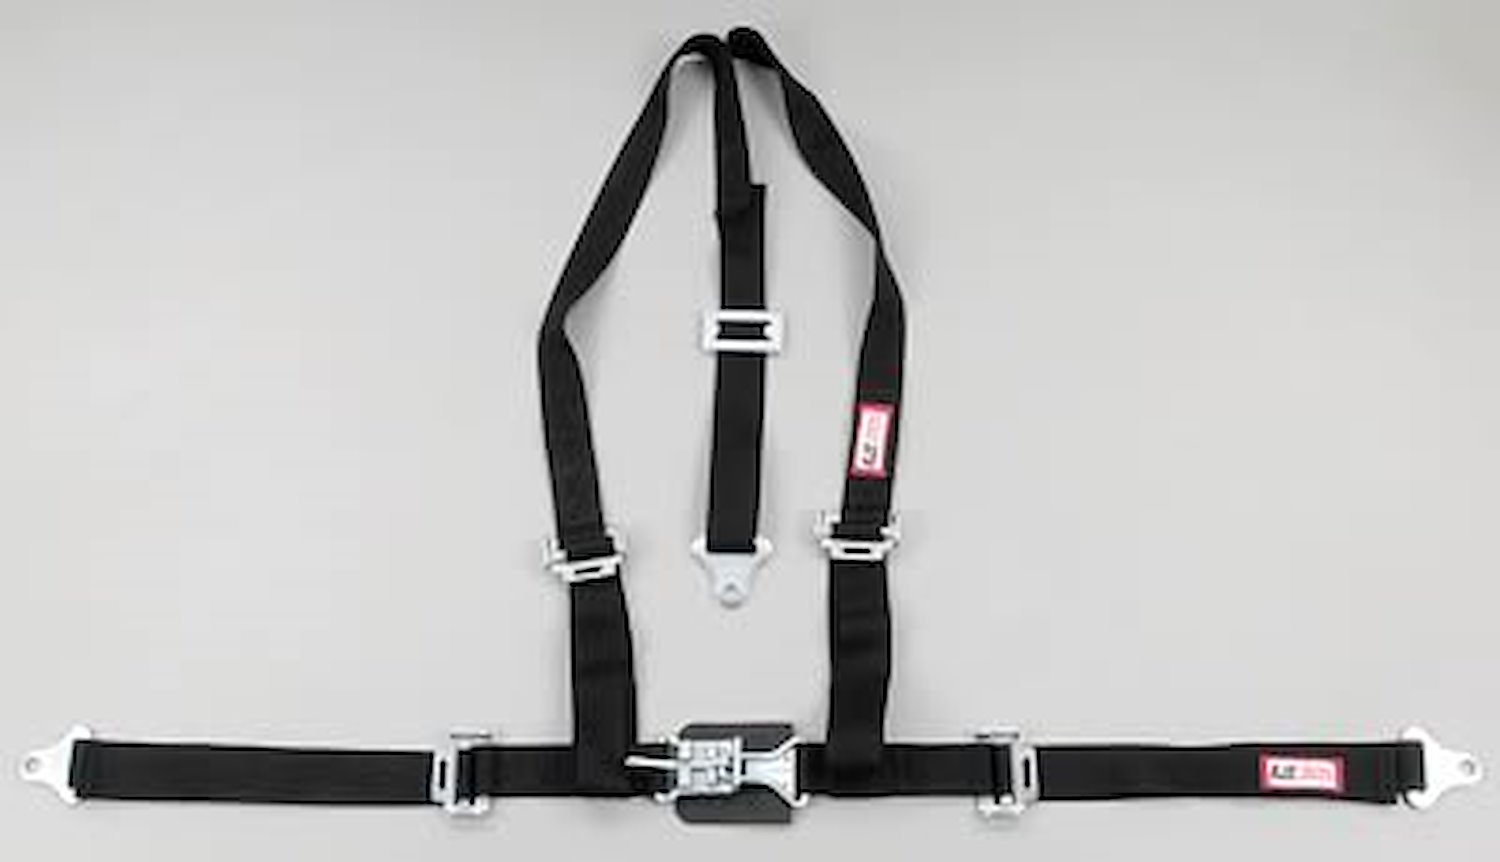 NON-SFI L&L HARNESS 2 PULL UP Lap Belt SNAP SEWN IN 2 S.H. INDIVIDUAL FLOOR Mount w/STERNUM STRAP WRAP/BOLT RED